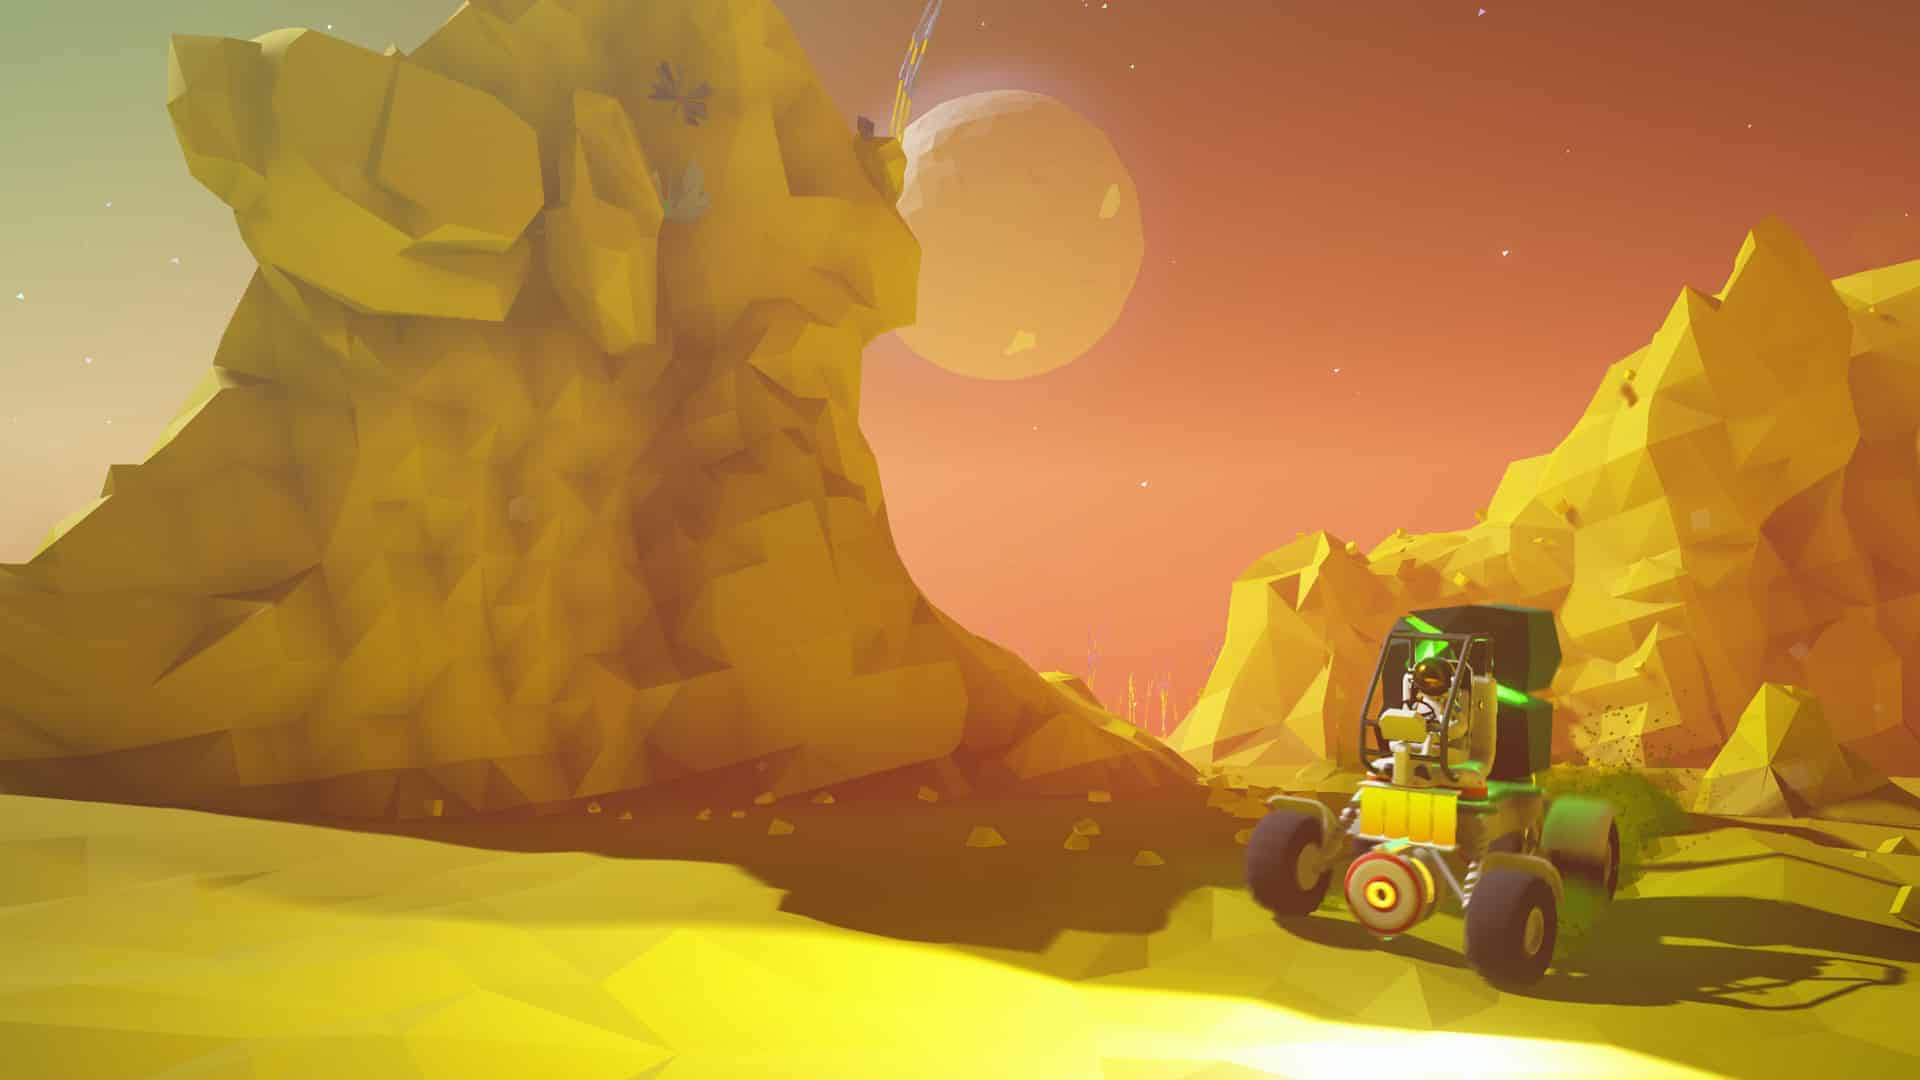 astroneer download february 2017 latest version